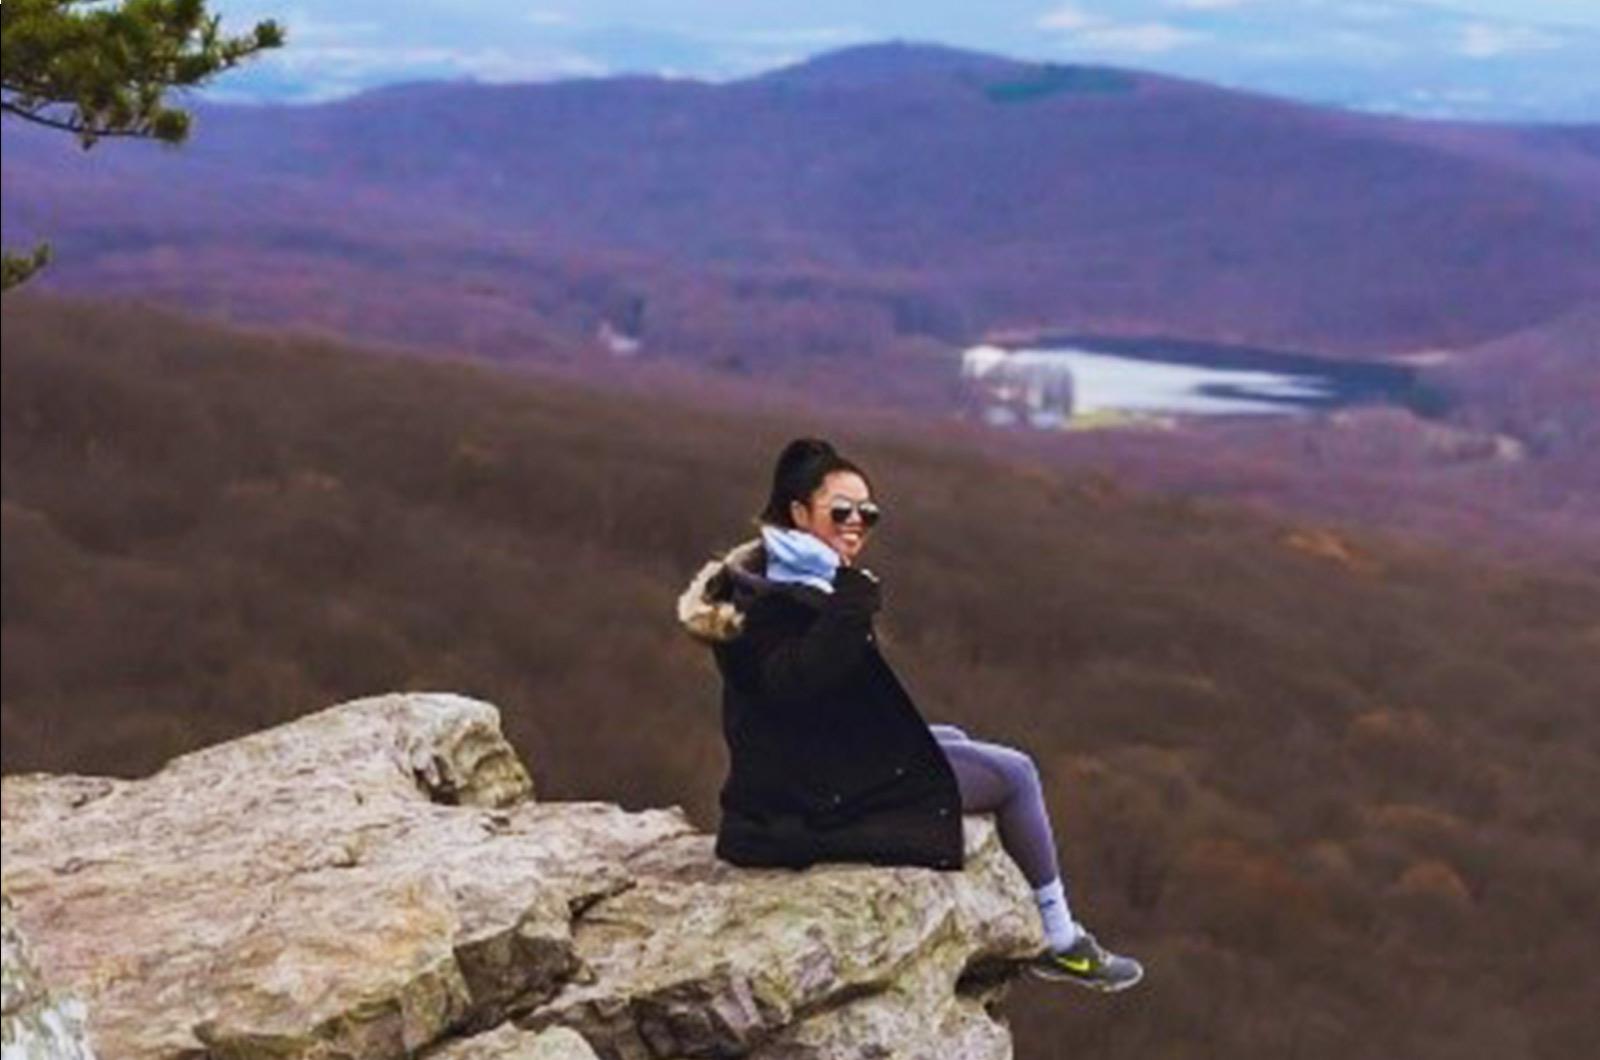 Student of the University of Maryland sitting on a big rock overlooking a valley